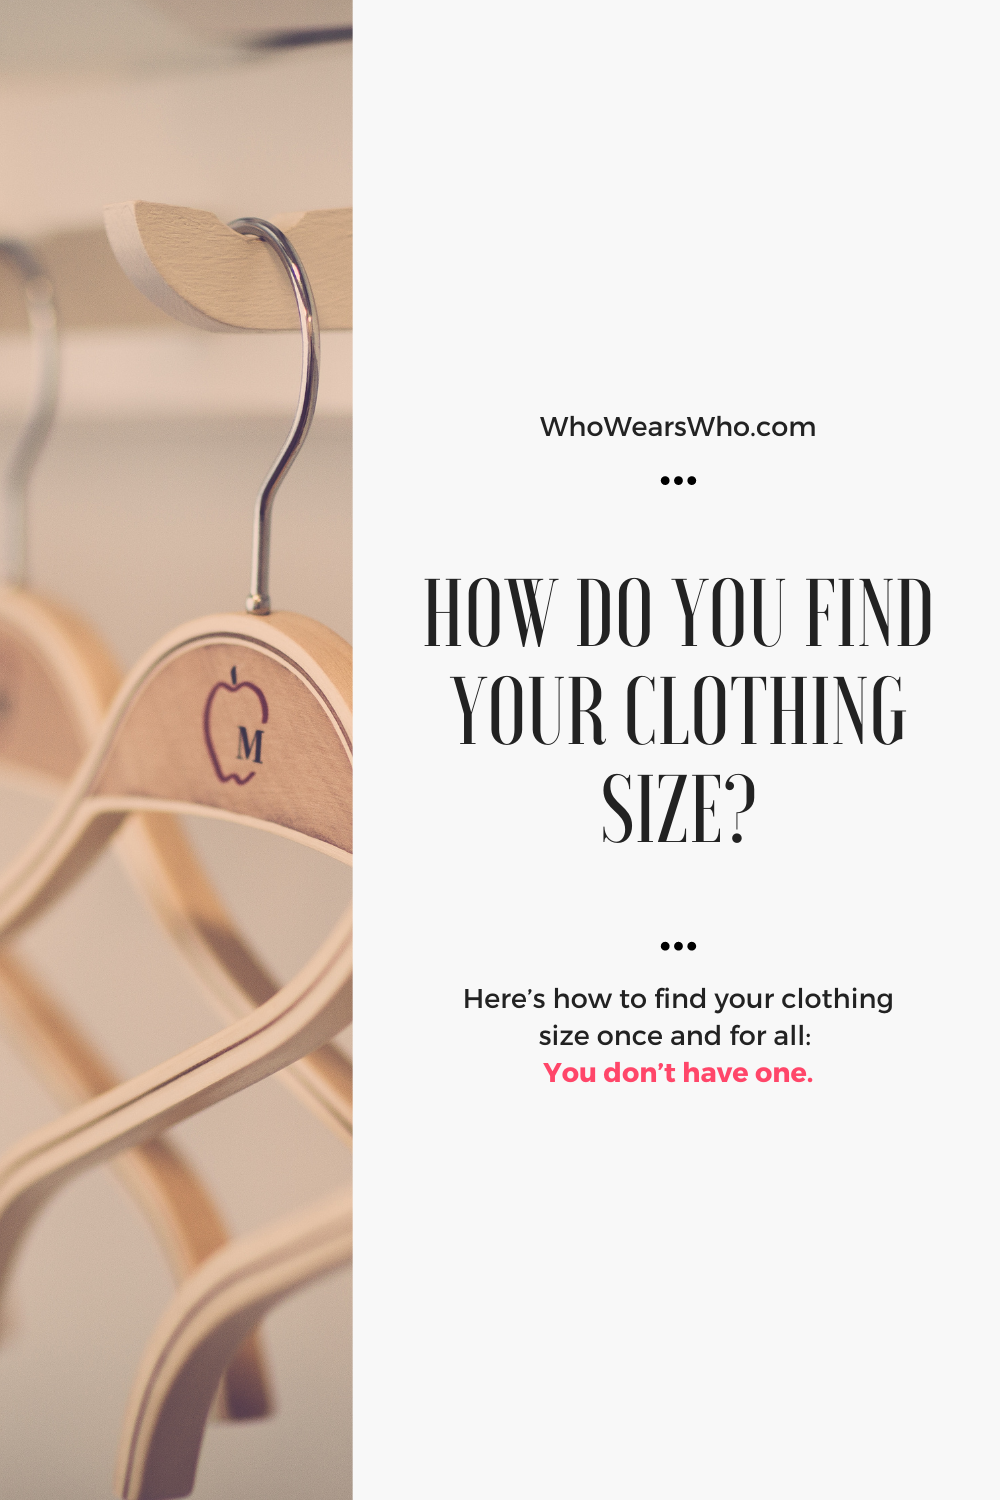 How do you find your clothing size?